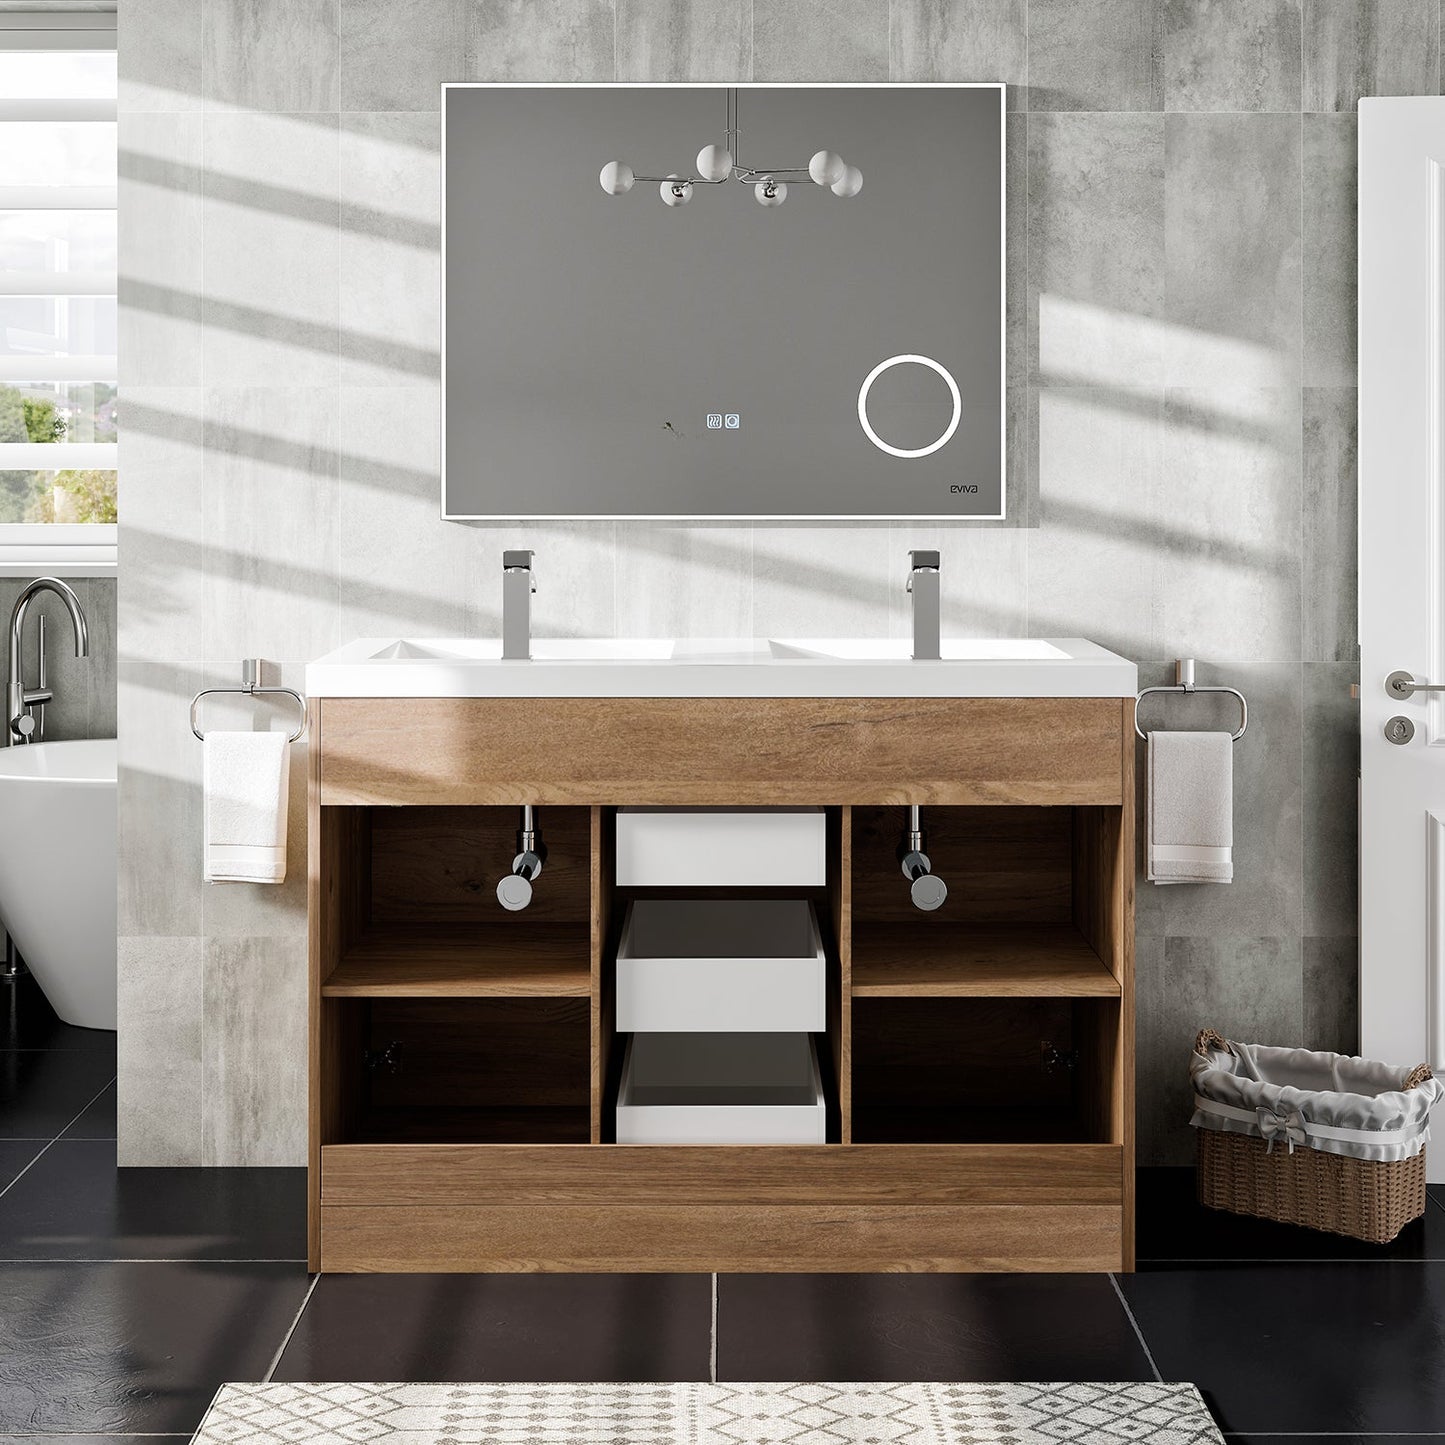 Lugano 48"W x 20"D Natural Oak Double Sink Bathroom Vanity with Acrylic Countertop and Integrated Sink